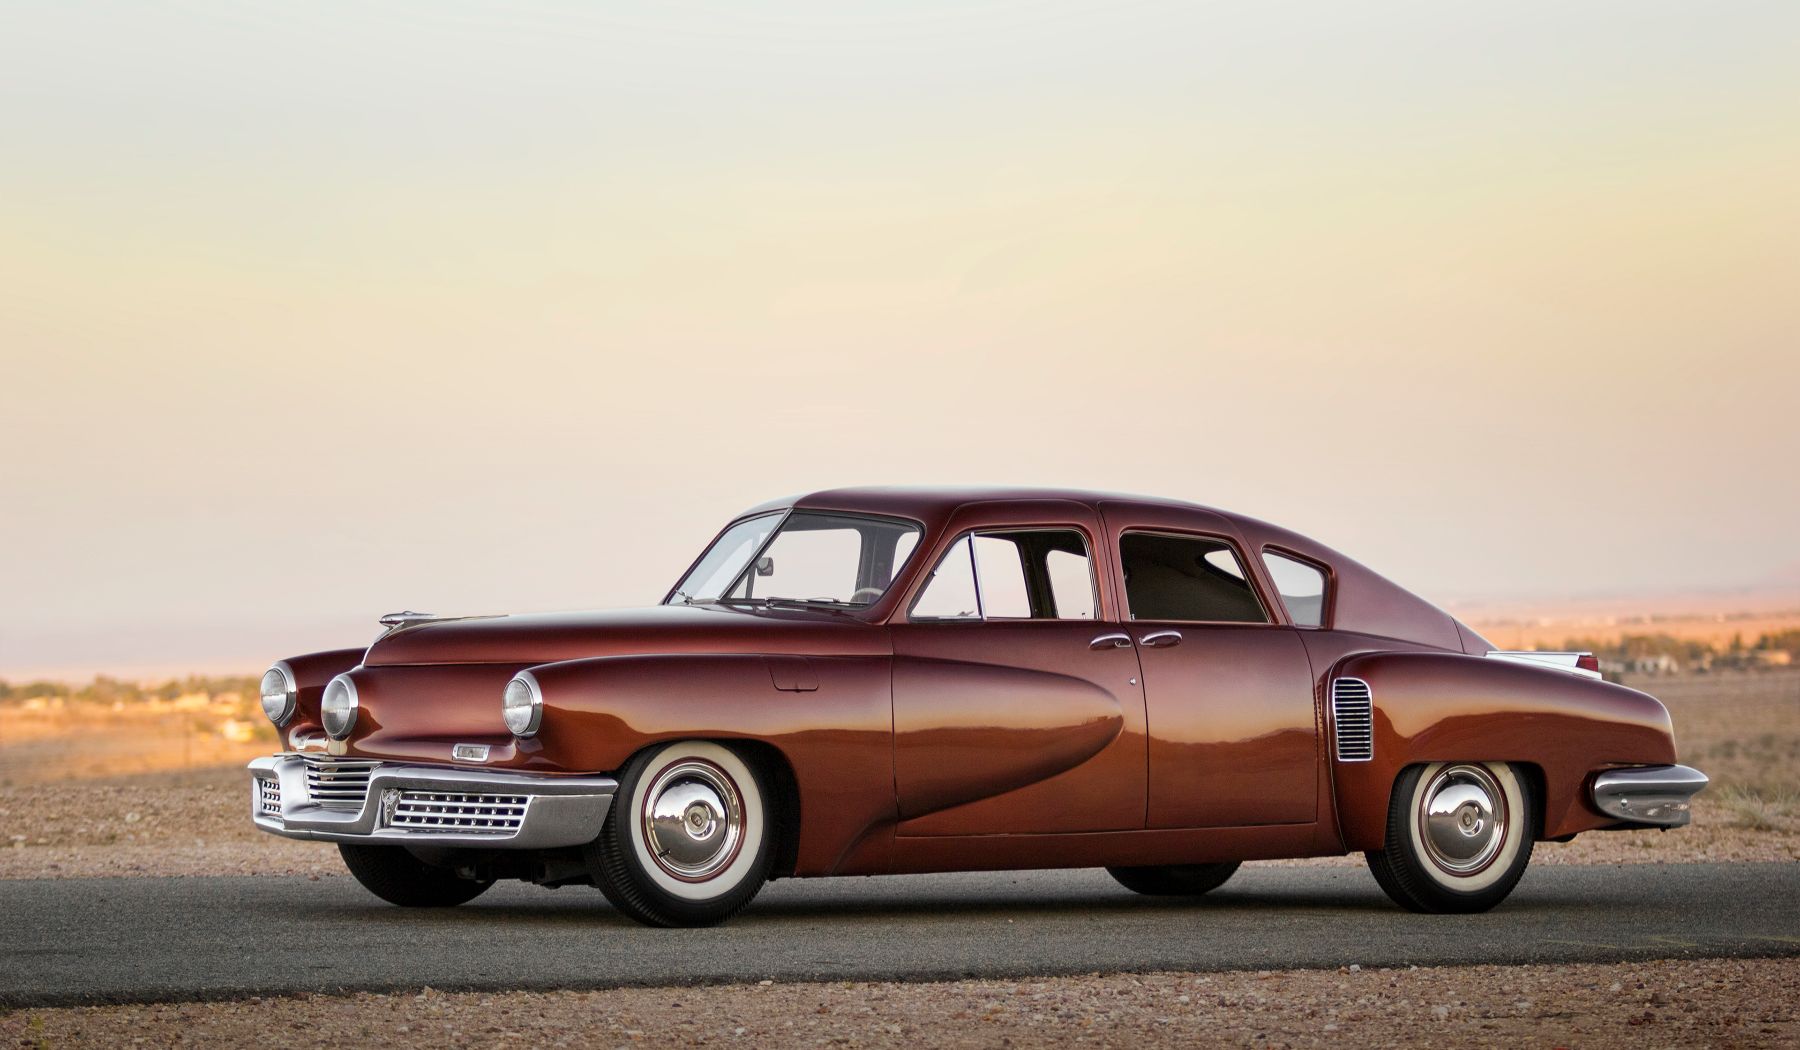 Remembering the Tucker 48, One of the Most Innovative Sedans Ever